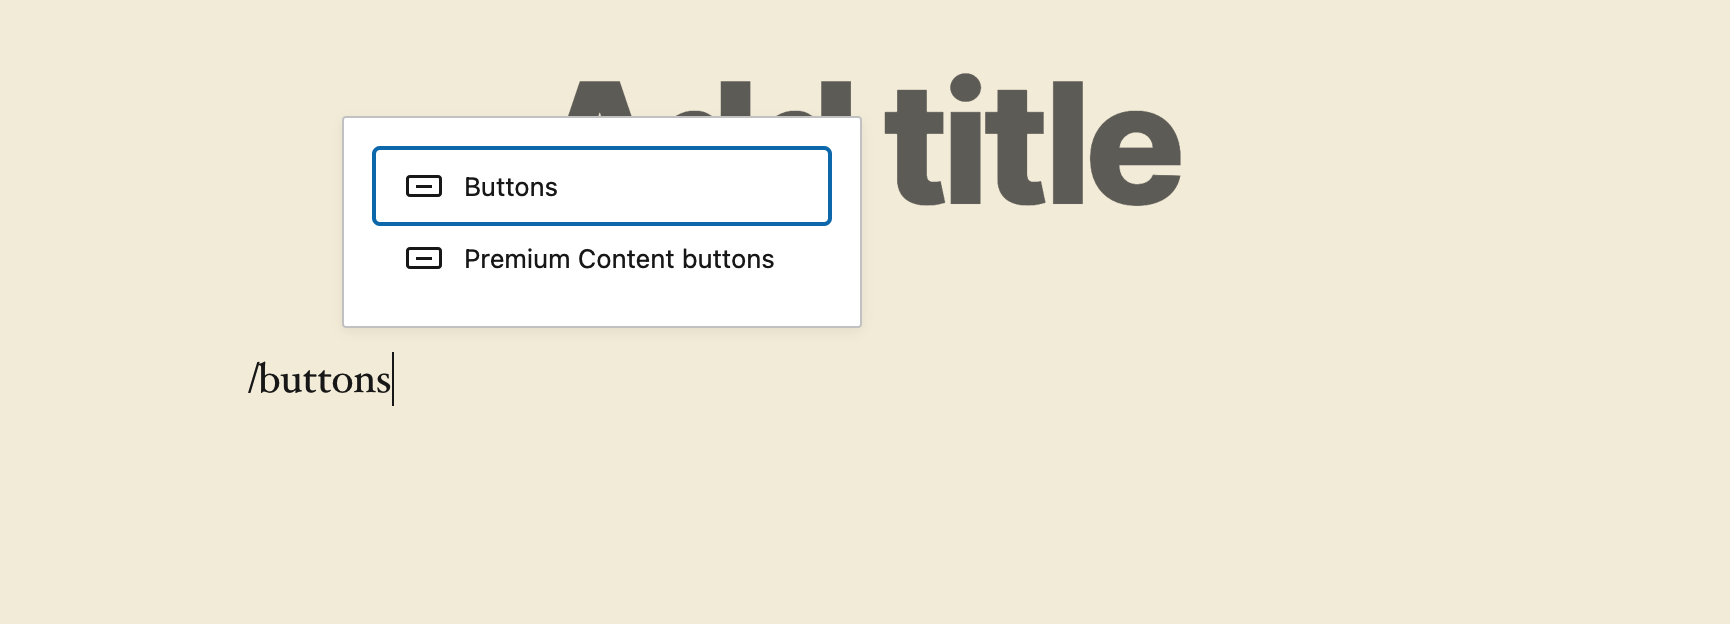 how to make it when a button is clicked a developer product is